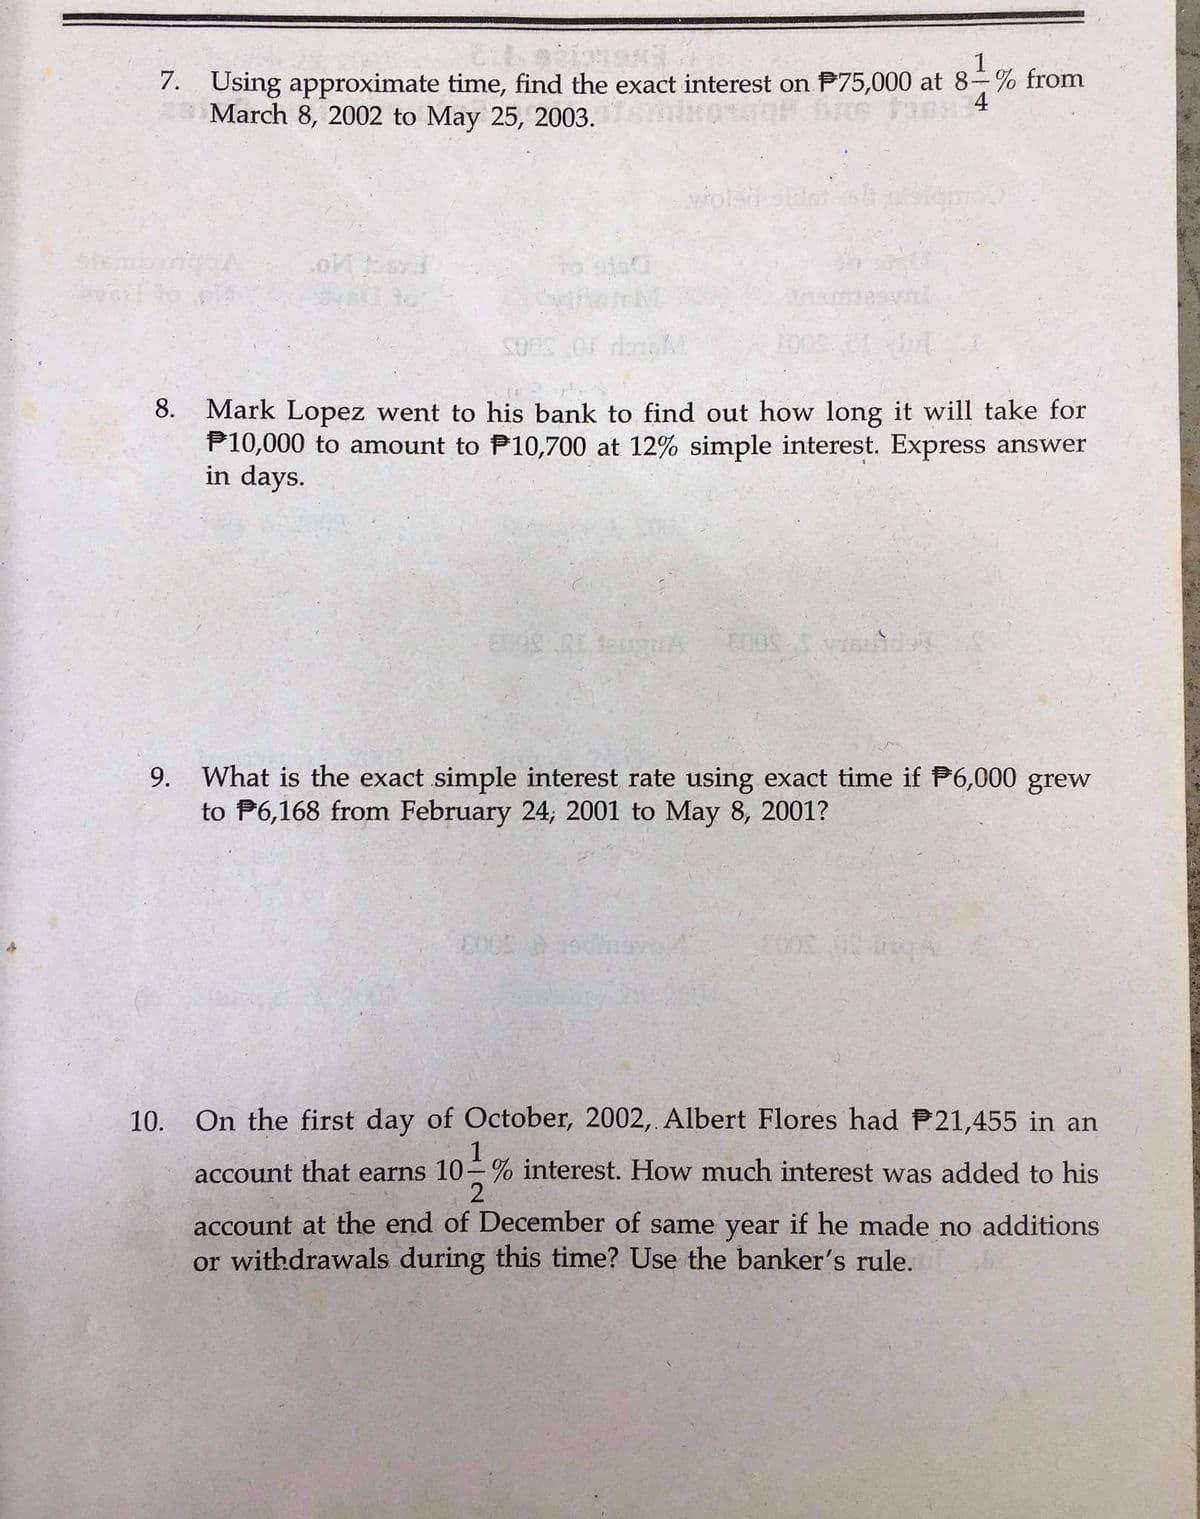 1
7. Using approximate time, find the exact interest on P75,000 at 8-% from
March 8, 2002 to May 25, 2003.
4
wolad
Inamesvni
10031
8. Mark Lopez went to his bank to find out how long it will take for
P10,000 to amount to P10,700 at 12% simple interest. Express answer
in days.
9. What is the exact simple interest rate using exact time if P6,000 grew
to P6,168 from February 24, 2001 to May 8, 2001?
10. On the first day of October, 2002, Albert Flores had P21,455 in an
1
account that earns 10-% interest. How much interest was added to his
2
account at the end of December of same year if he made no additions
or withdrawals during this time? Use the banker's rule.
